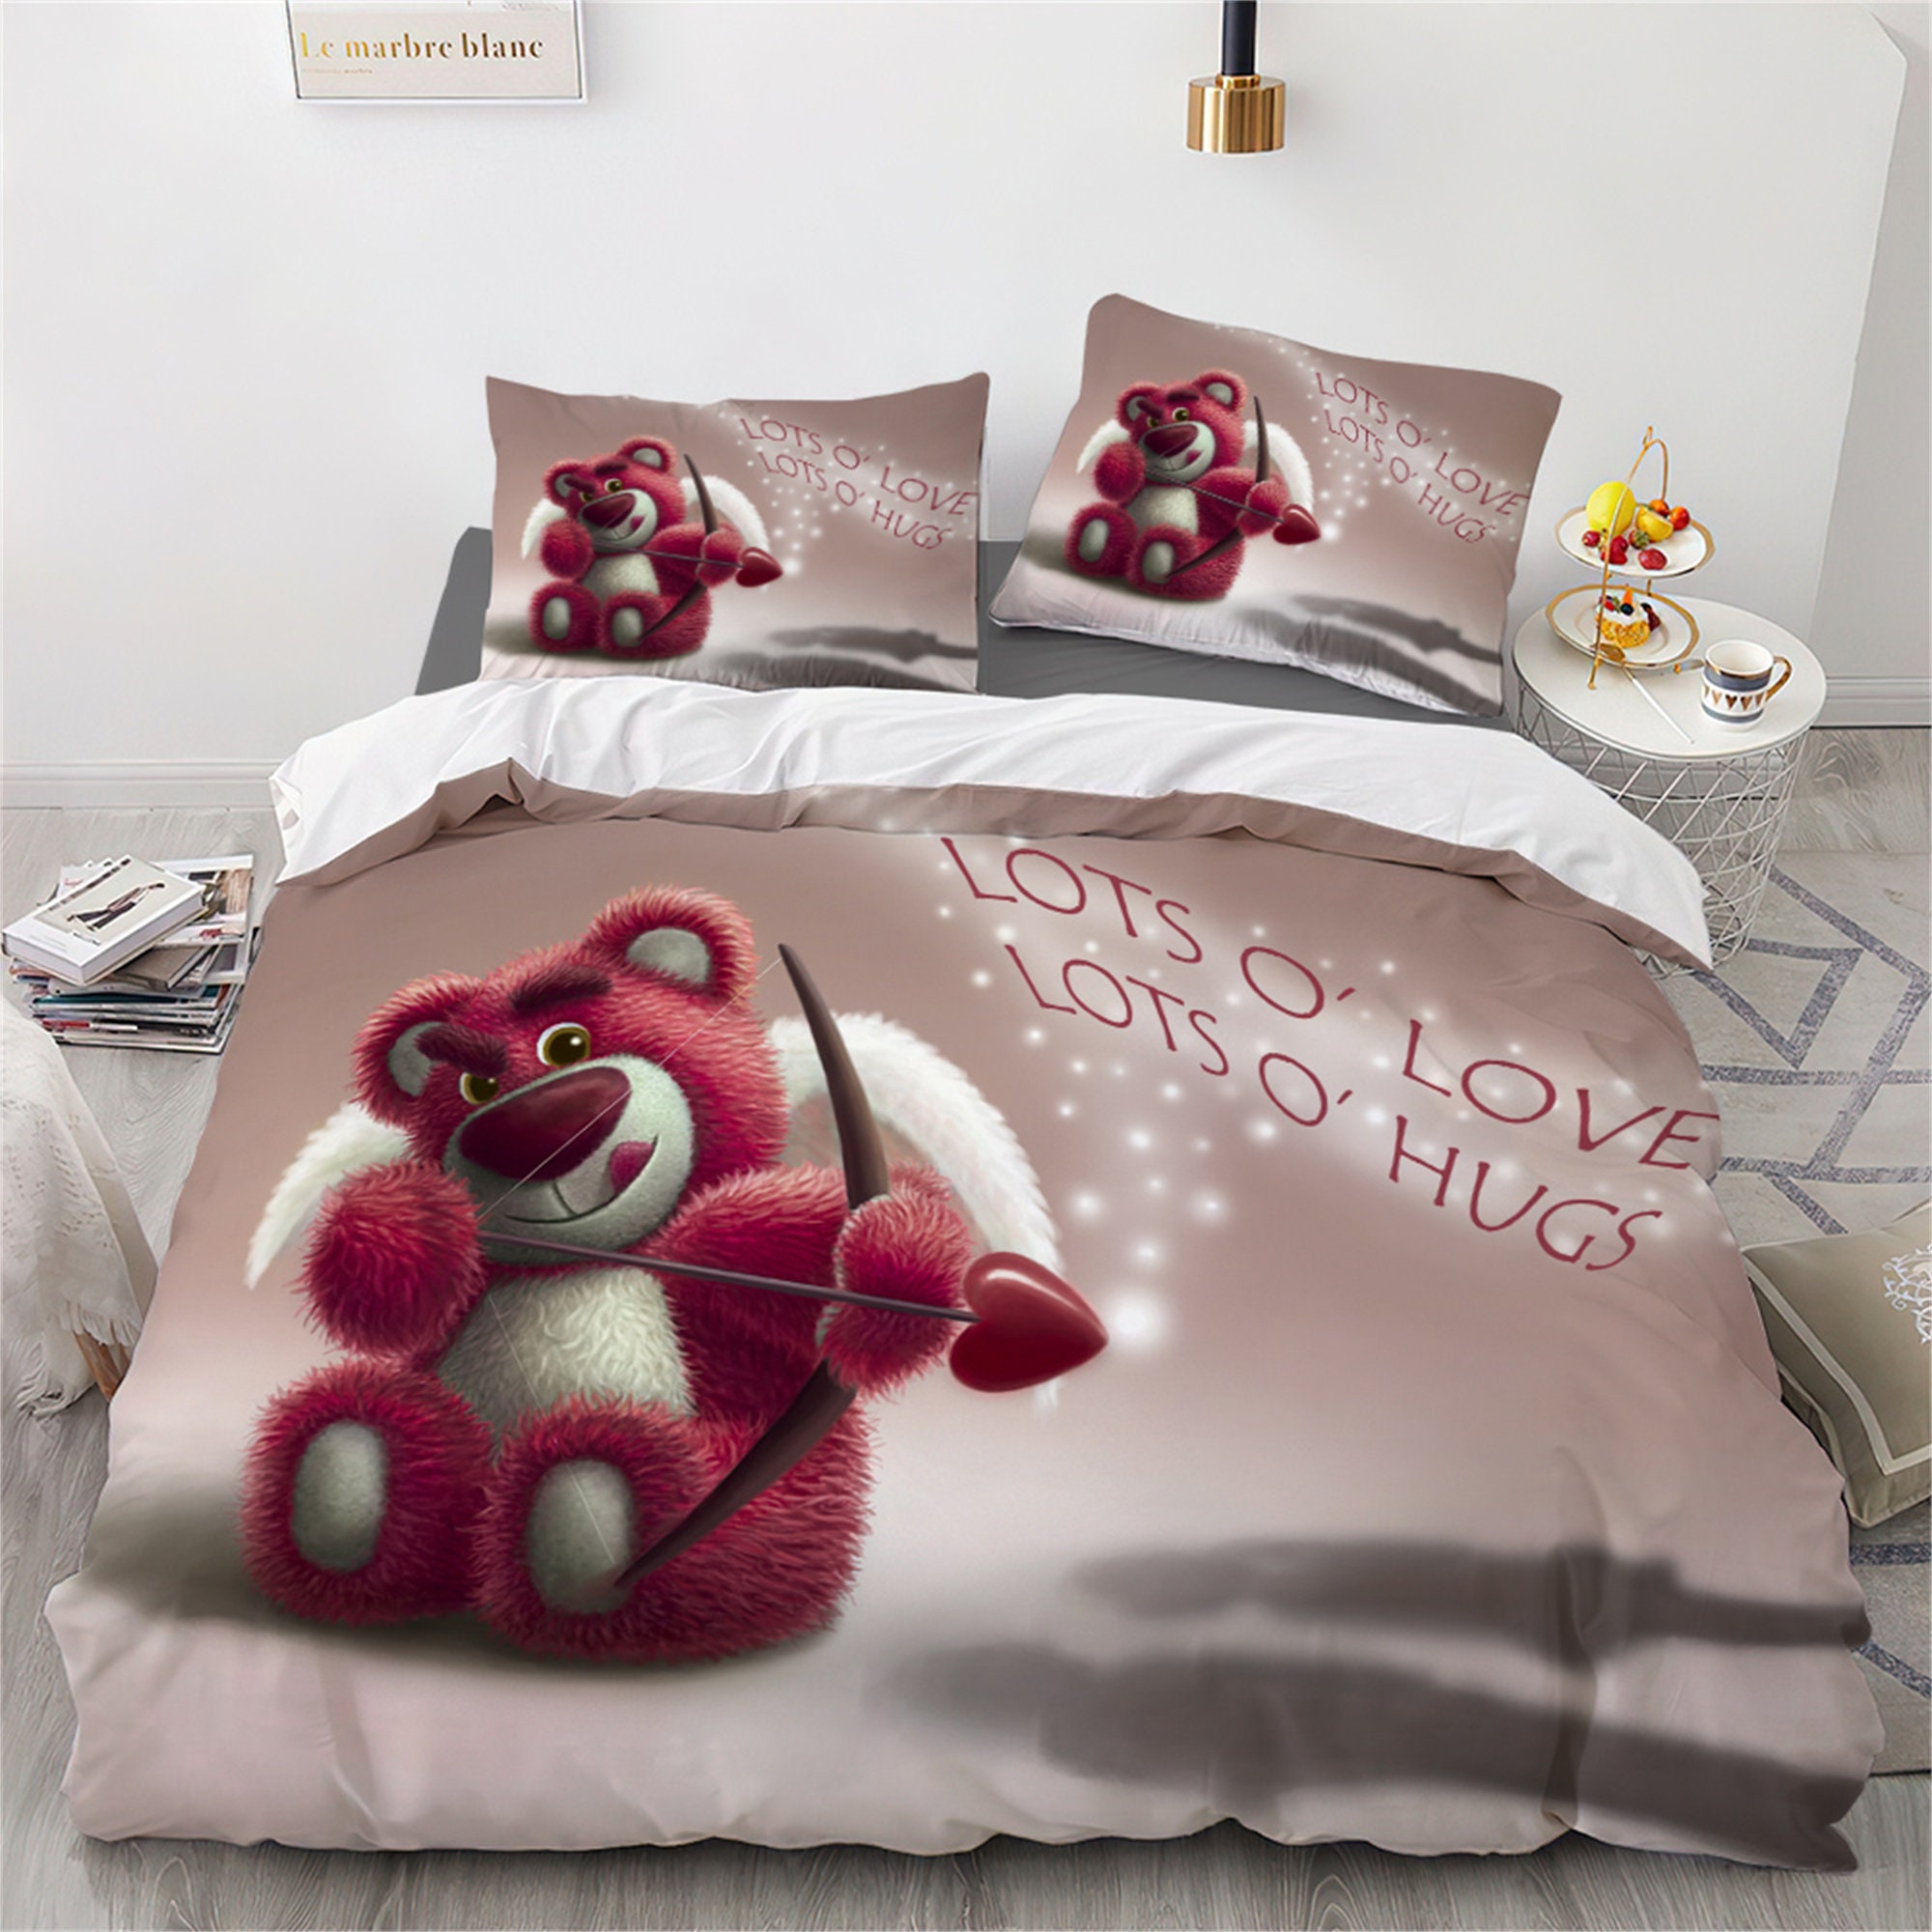 Memory Bear Sewing Template Handmade Memory Bear Template Sewing Pattern  Set With Accessories And Instructions For Bed Bedroom - AliExpress